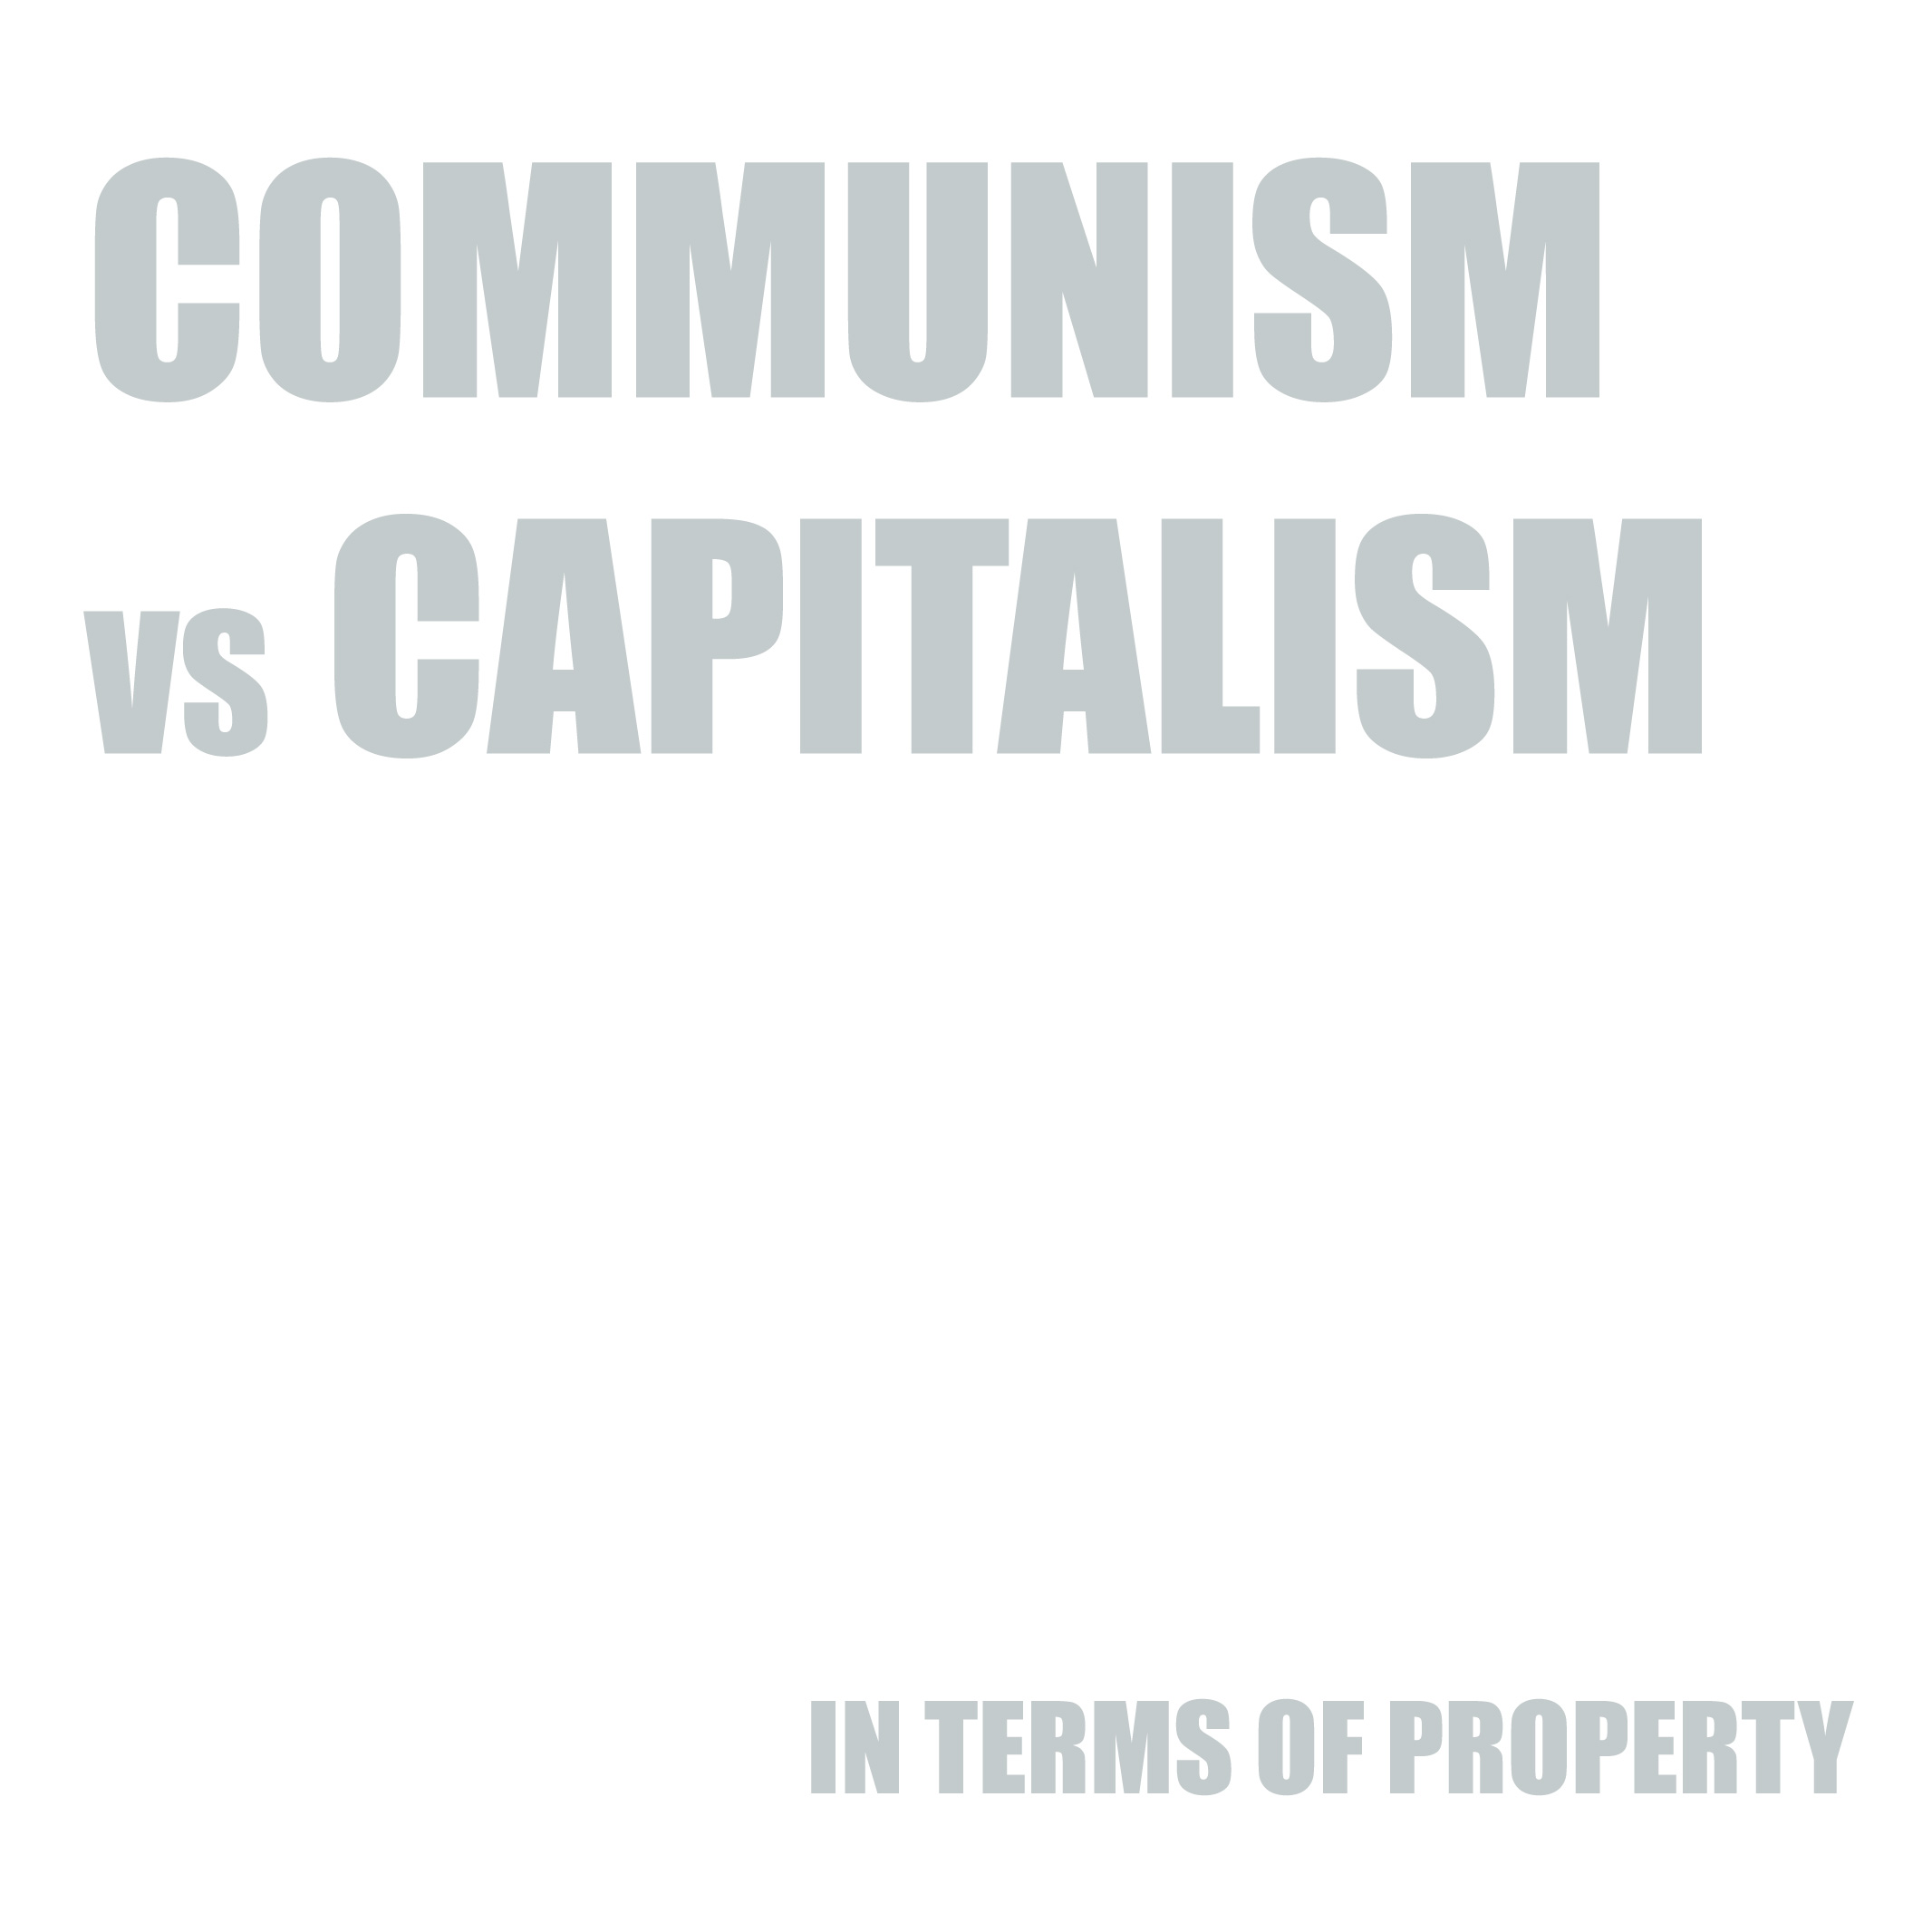 Downsizing private property to communist and capitalistic perspective.